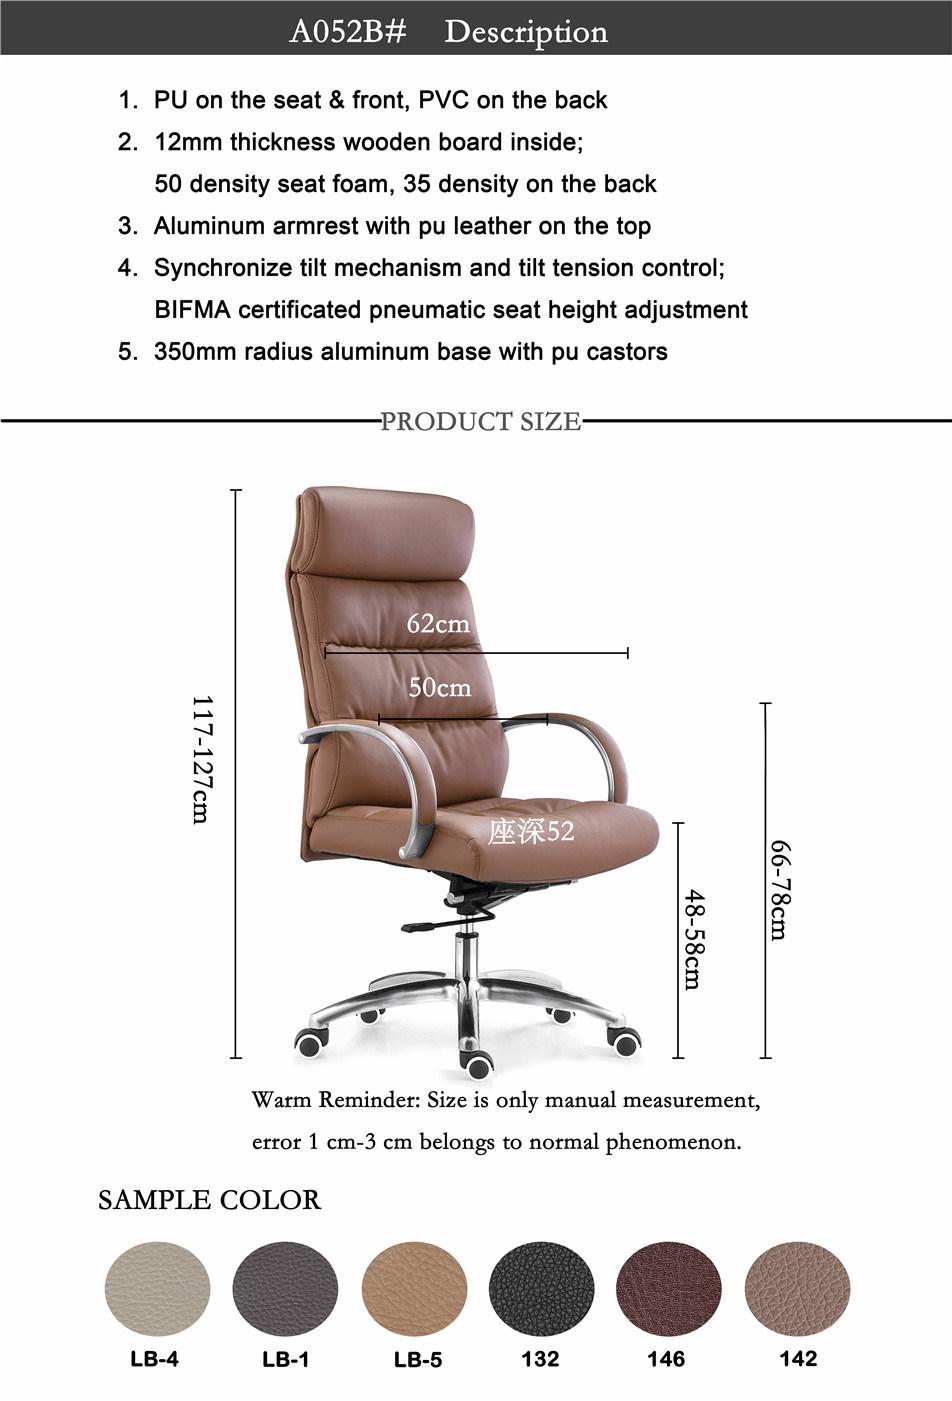 Comfortable High Back Computer Chair Executive Boss/Manager Leather Office Chair